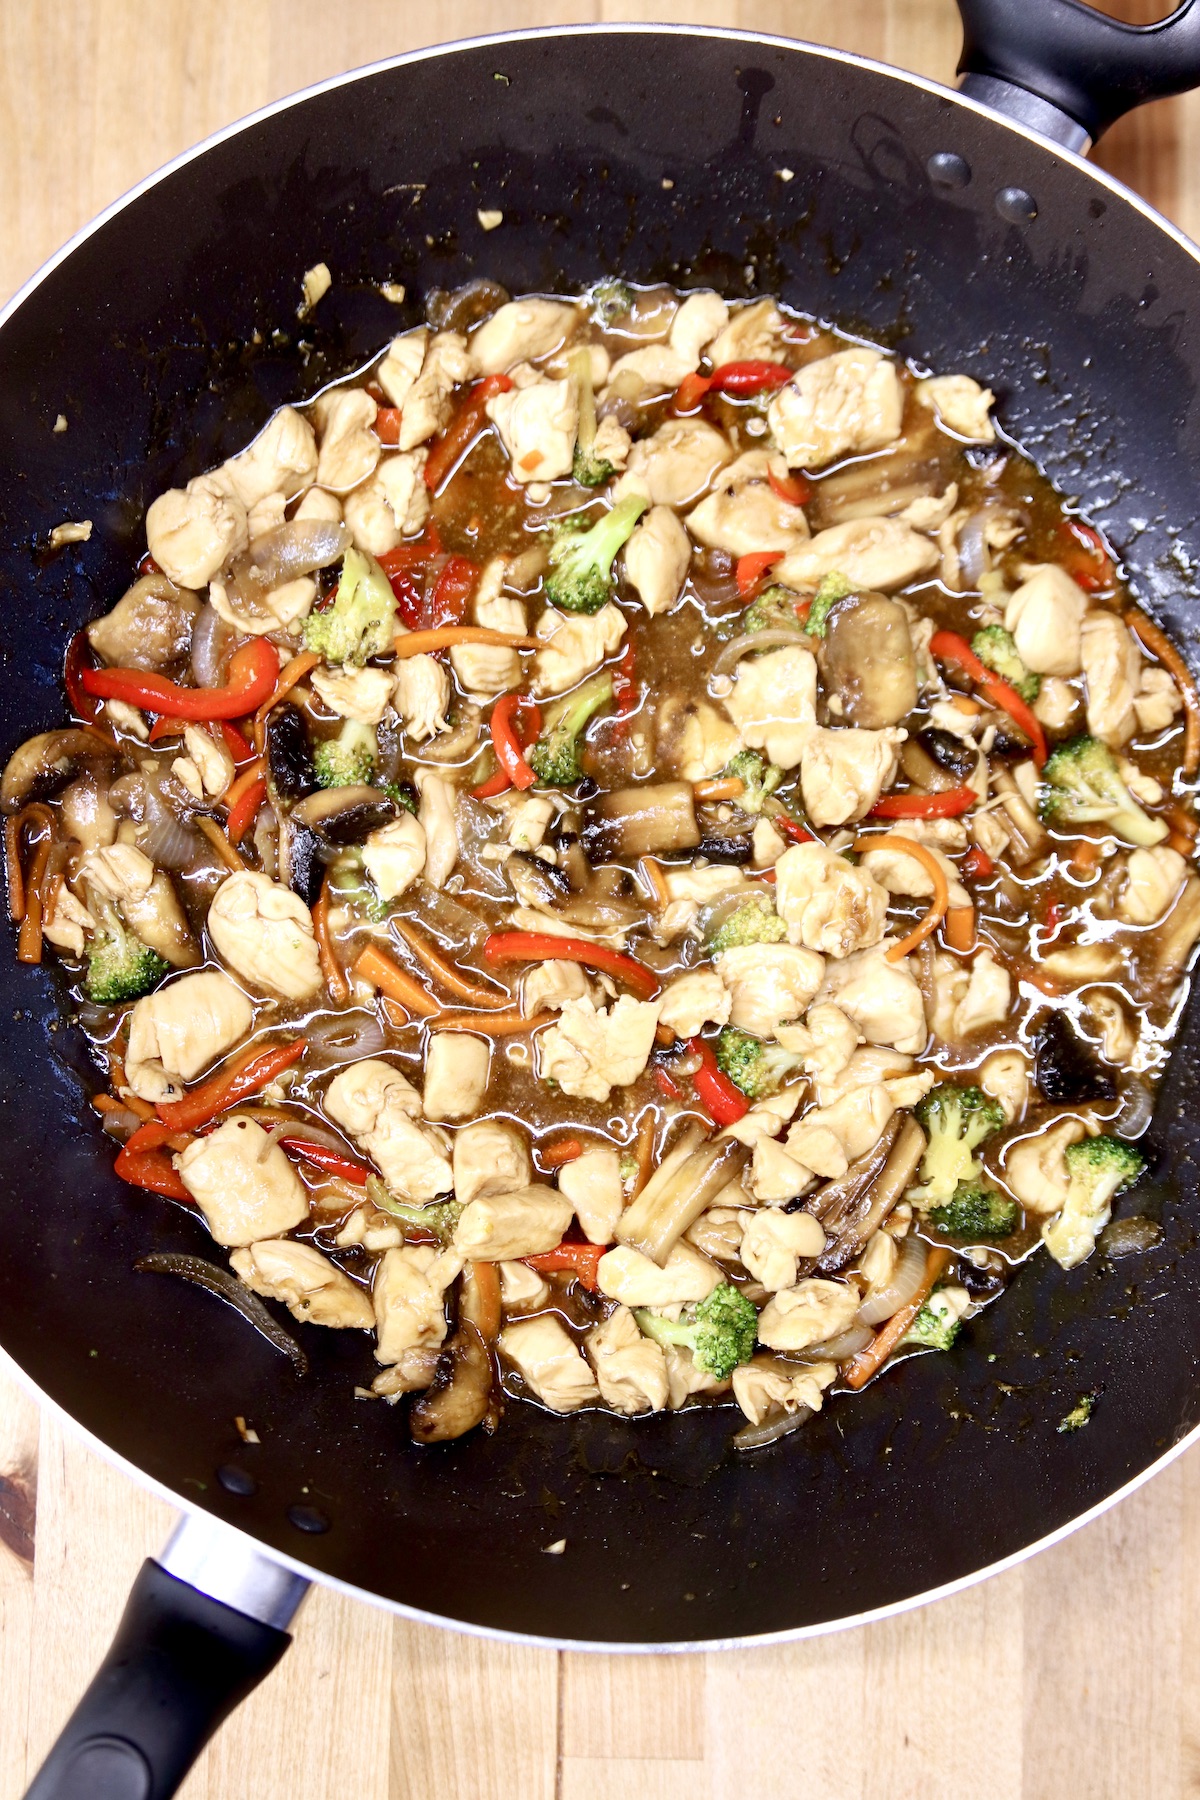 chicken and vegetable stir fry